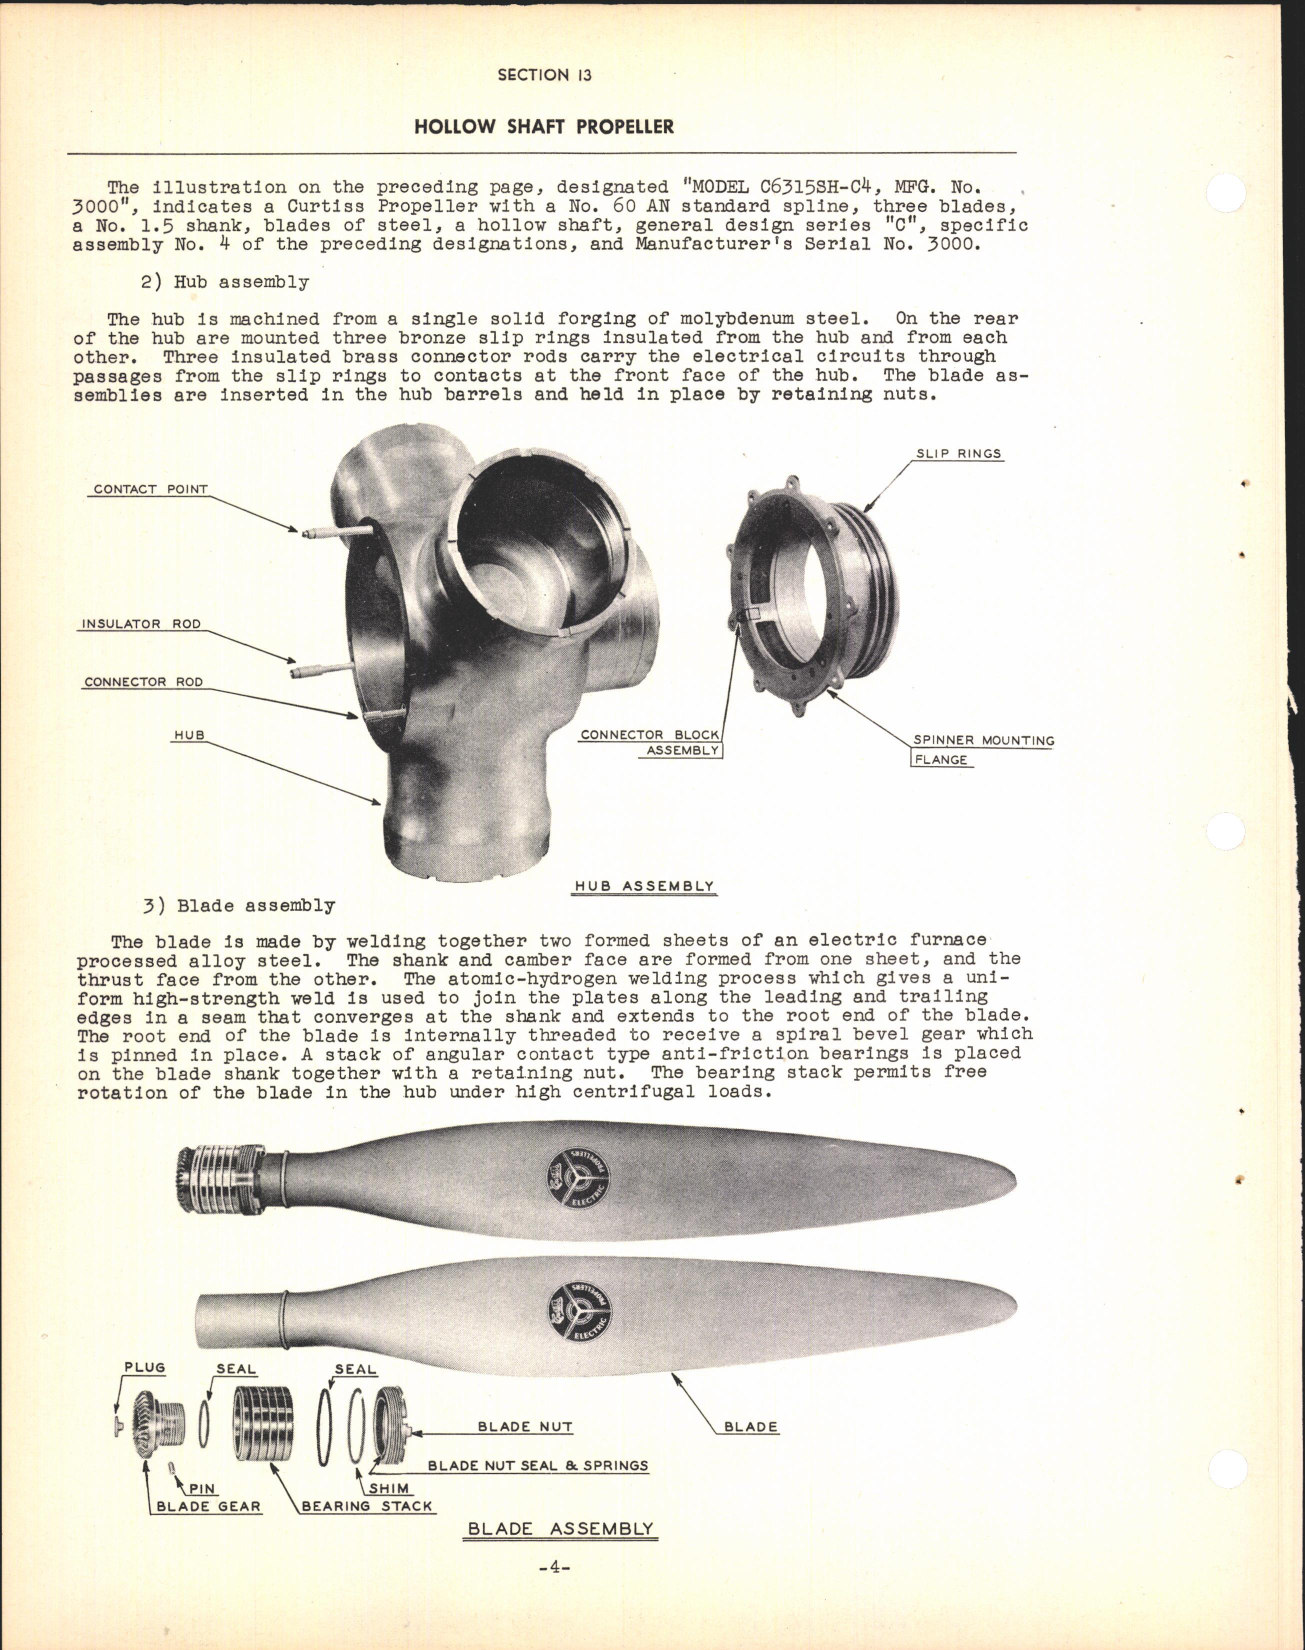 Sample page 6 from AirCorps Library document: Section 13 - Hollow Shaft Propeller (Three Blade)